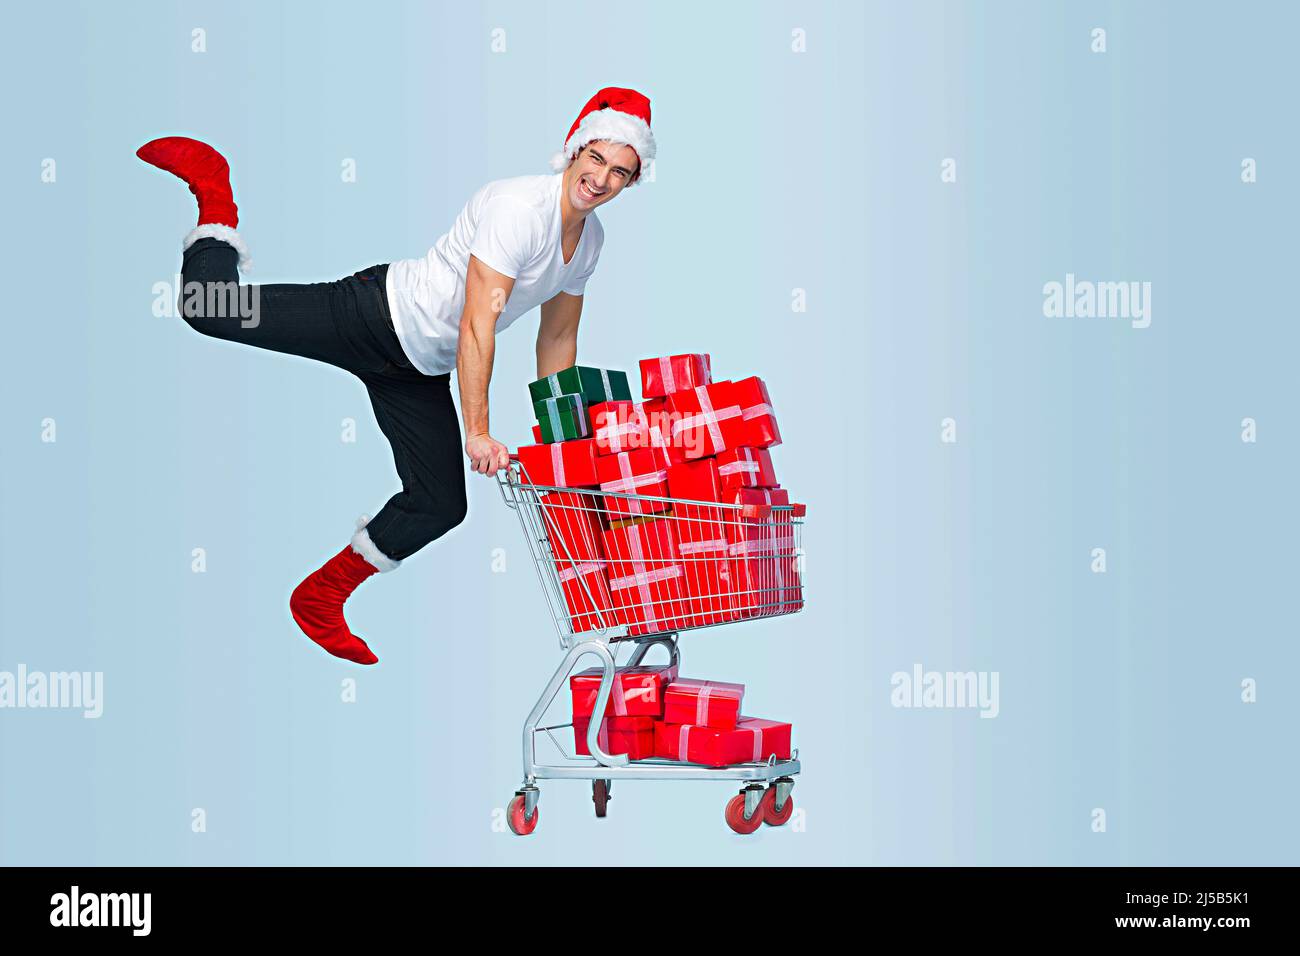 Man having many gift boxes in a shopping cart and jumping Stock Photo